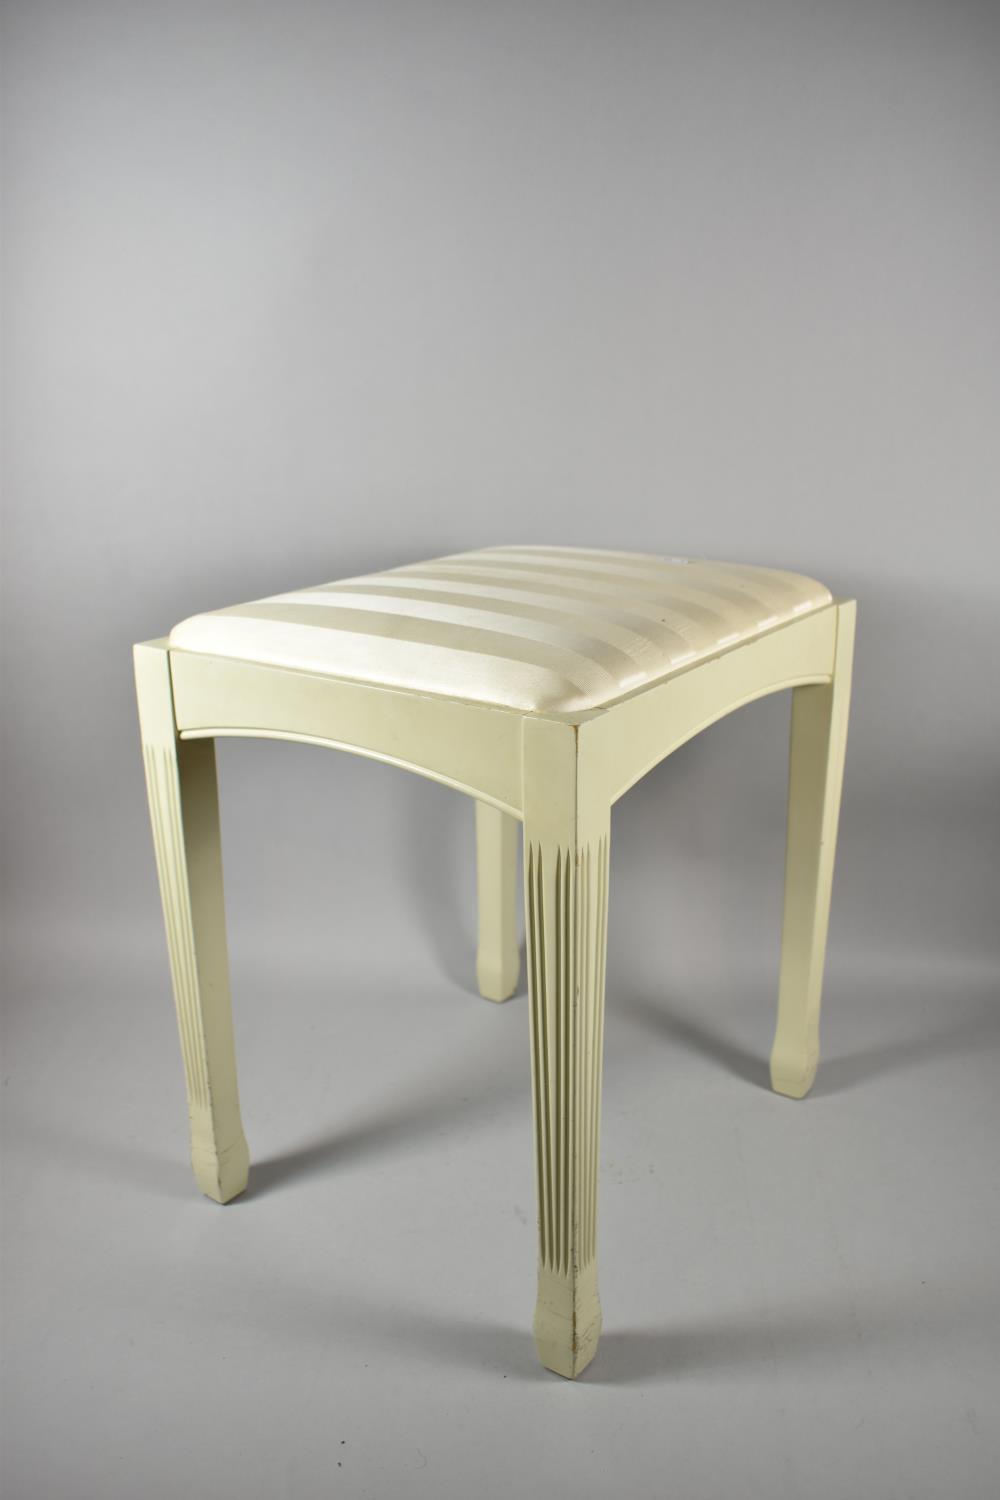 A Cream Painted Rectangular Dressing Table Stool, 42cm wide